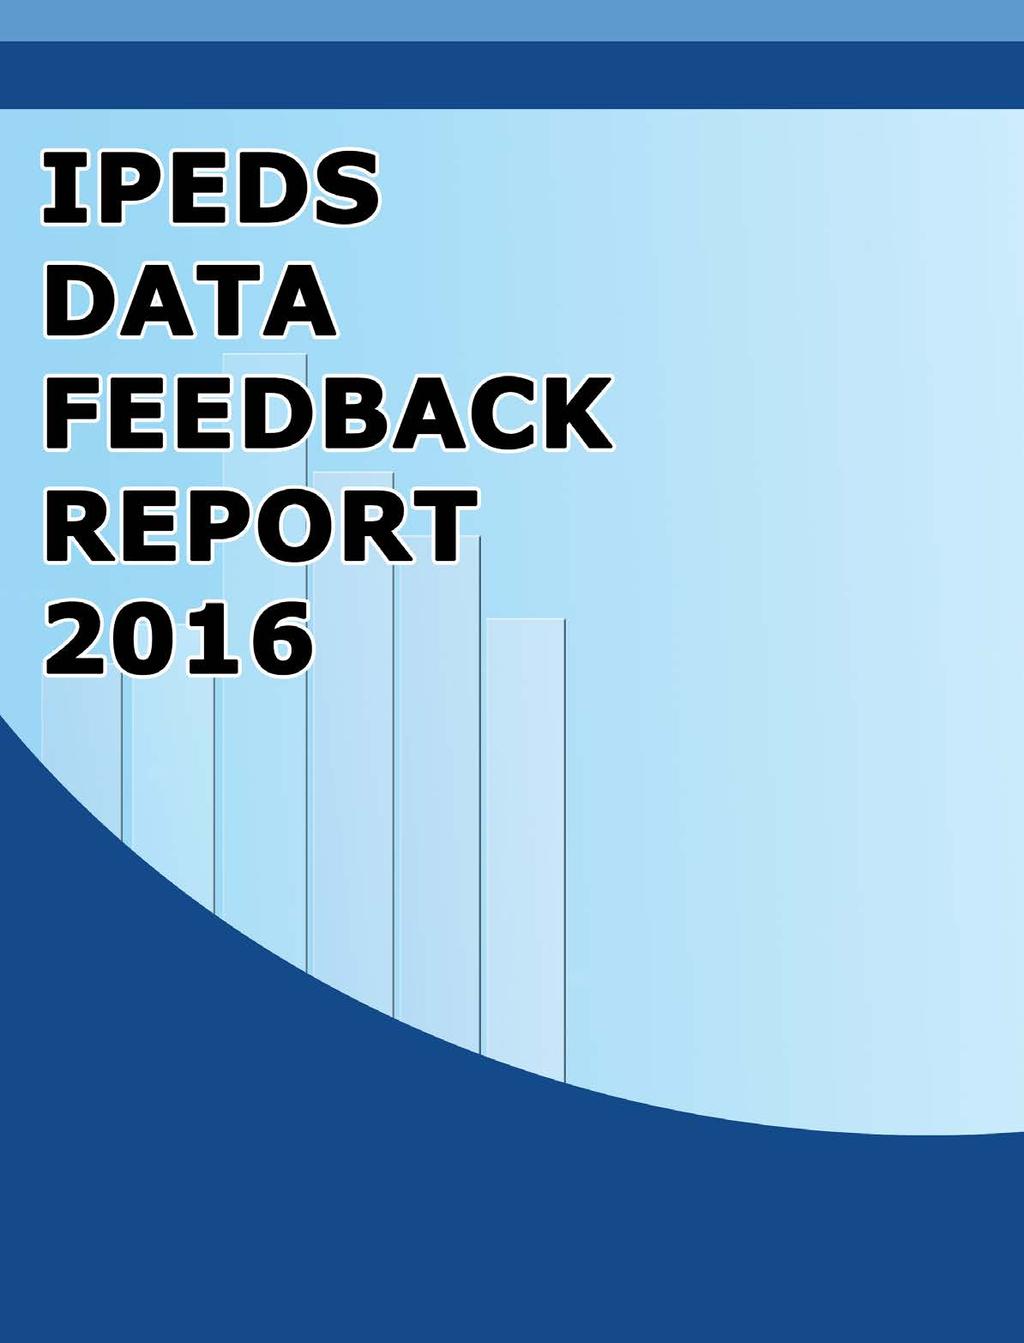 Cover Image End of image description. NATIONAL CENTER FOR EDUCATION STATISTICS What Is IPEDS?